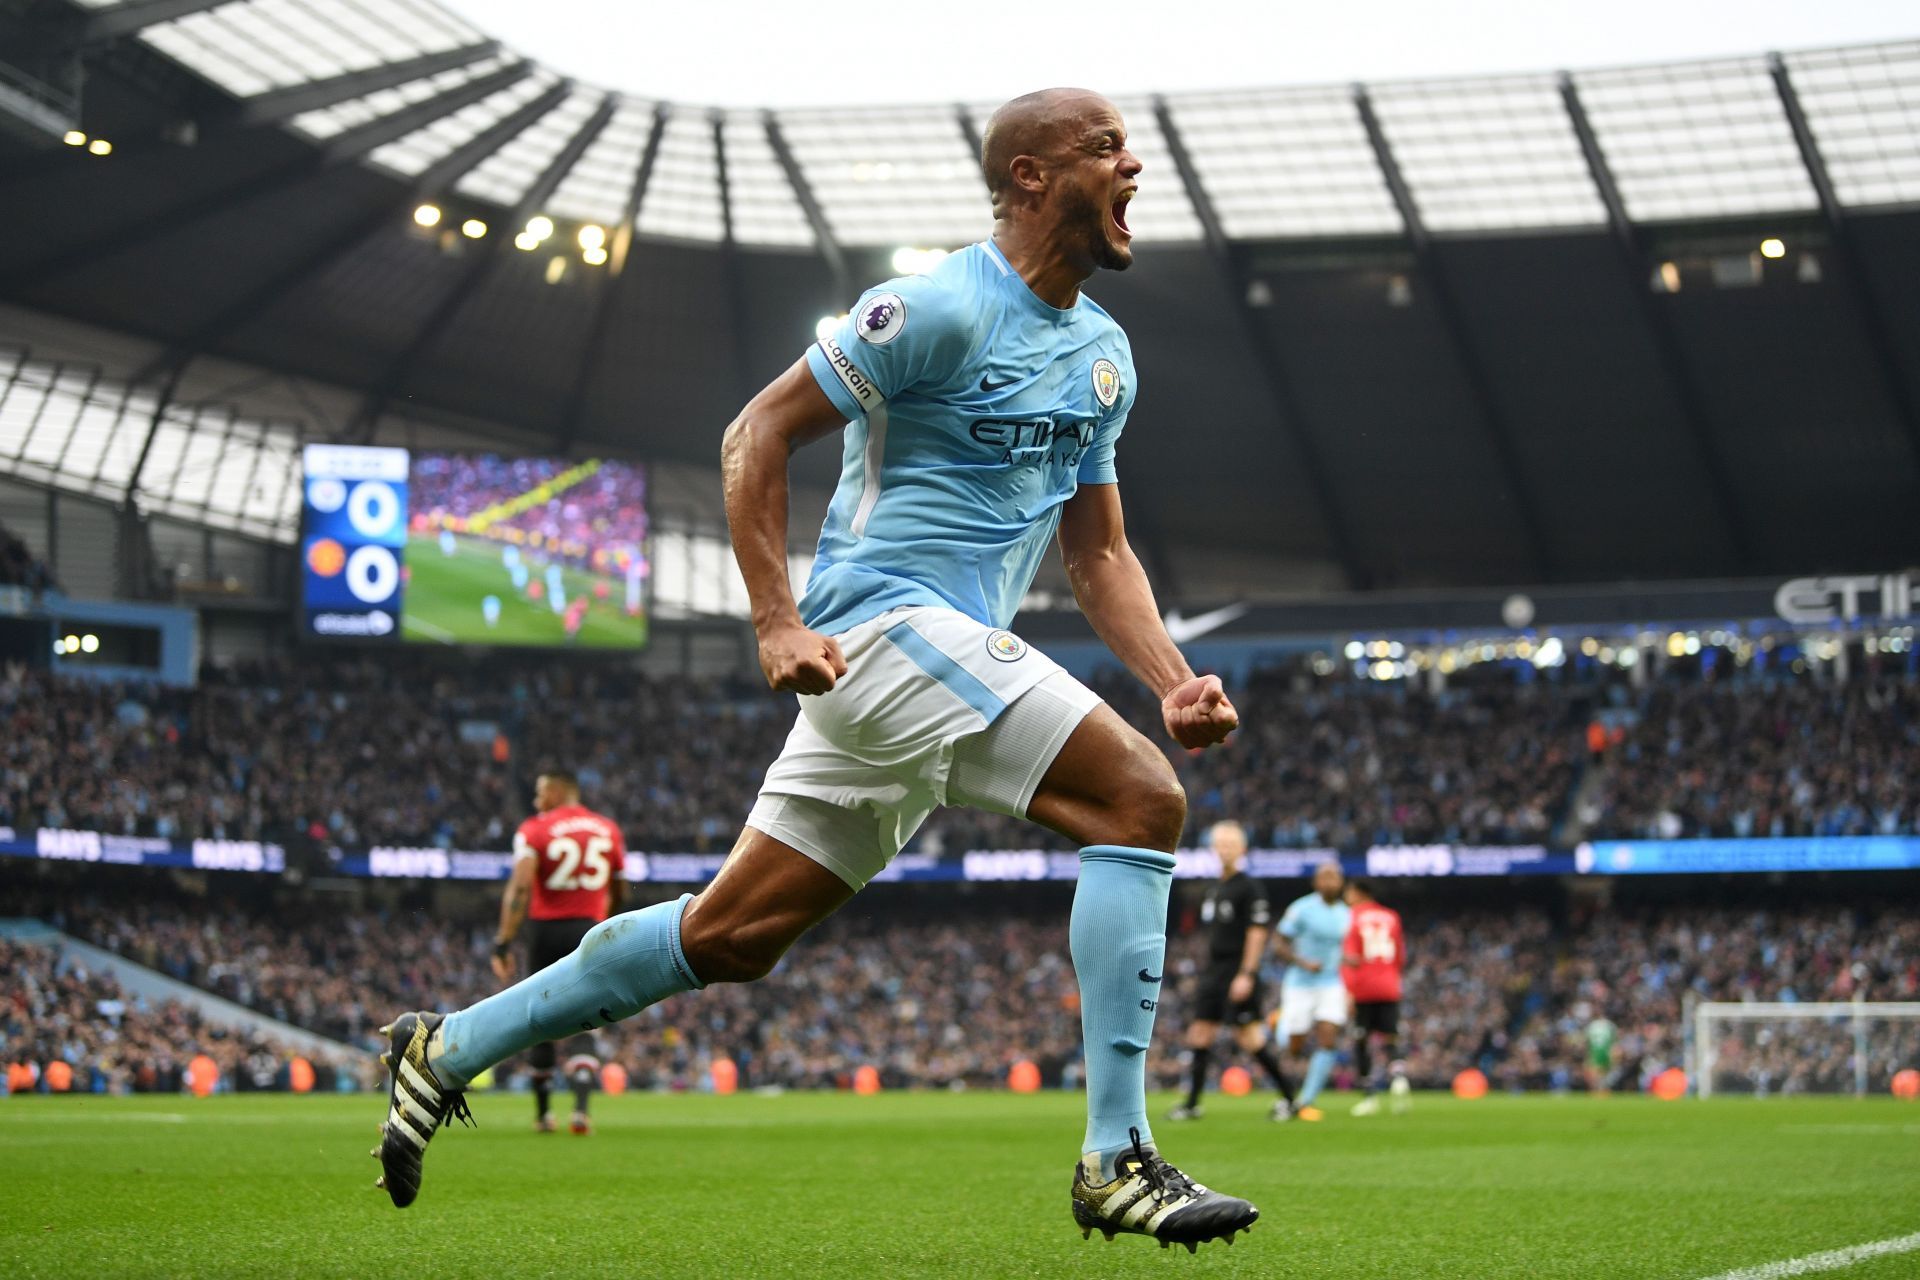 Barcelona tried to sign Vicent Kompany on many occasions.